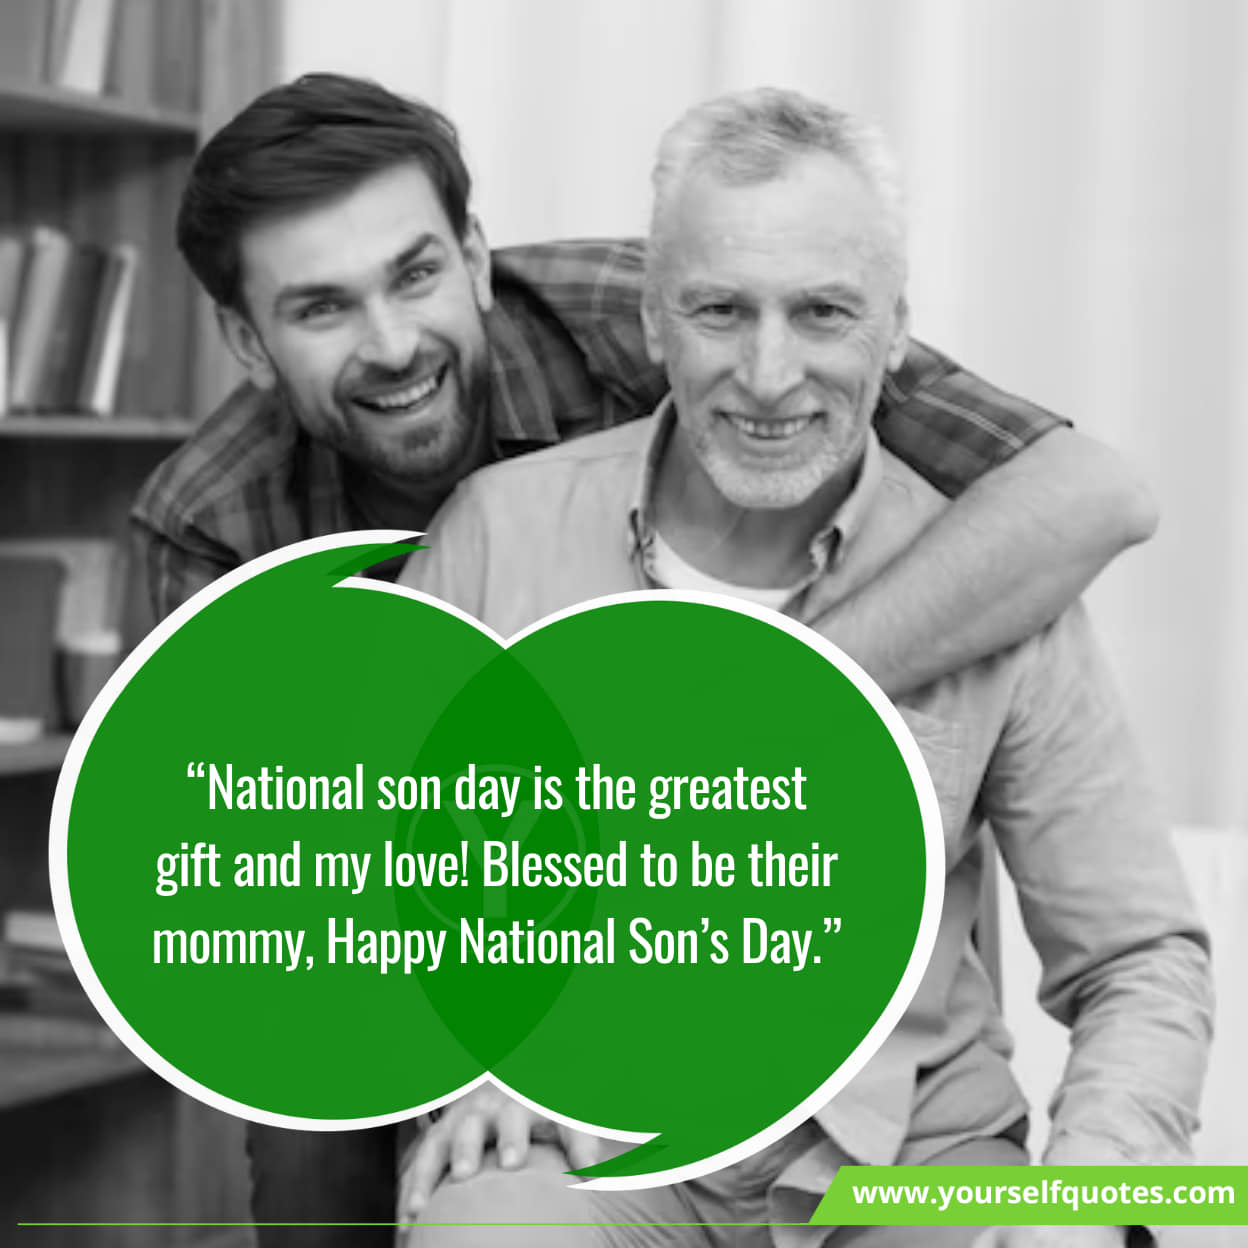 Heartwarming National Sons Day Greetings